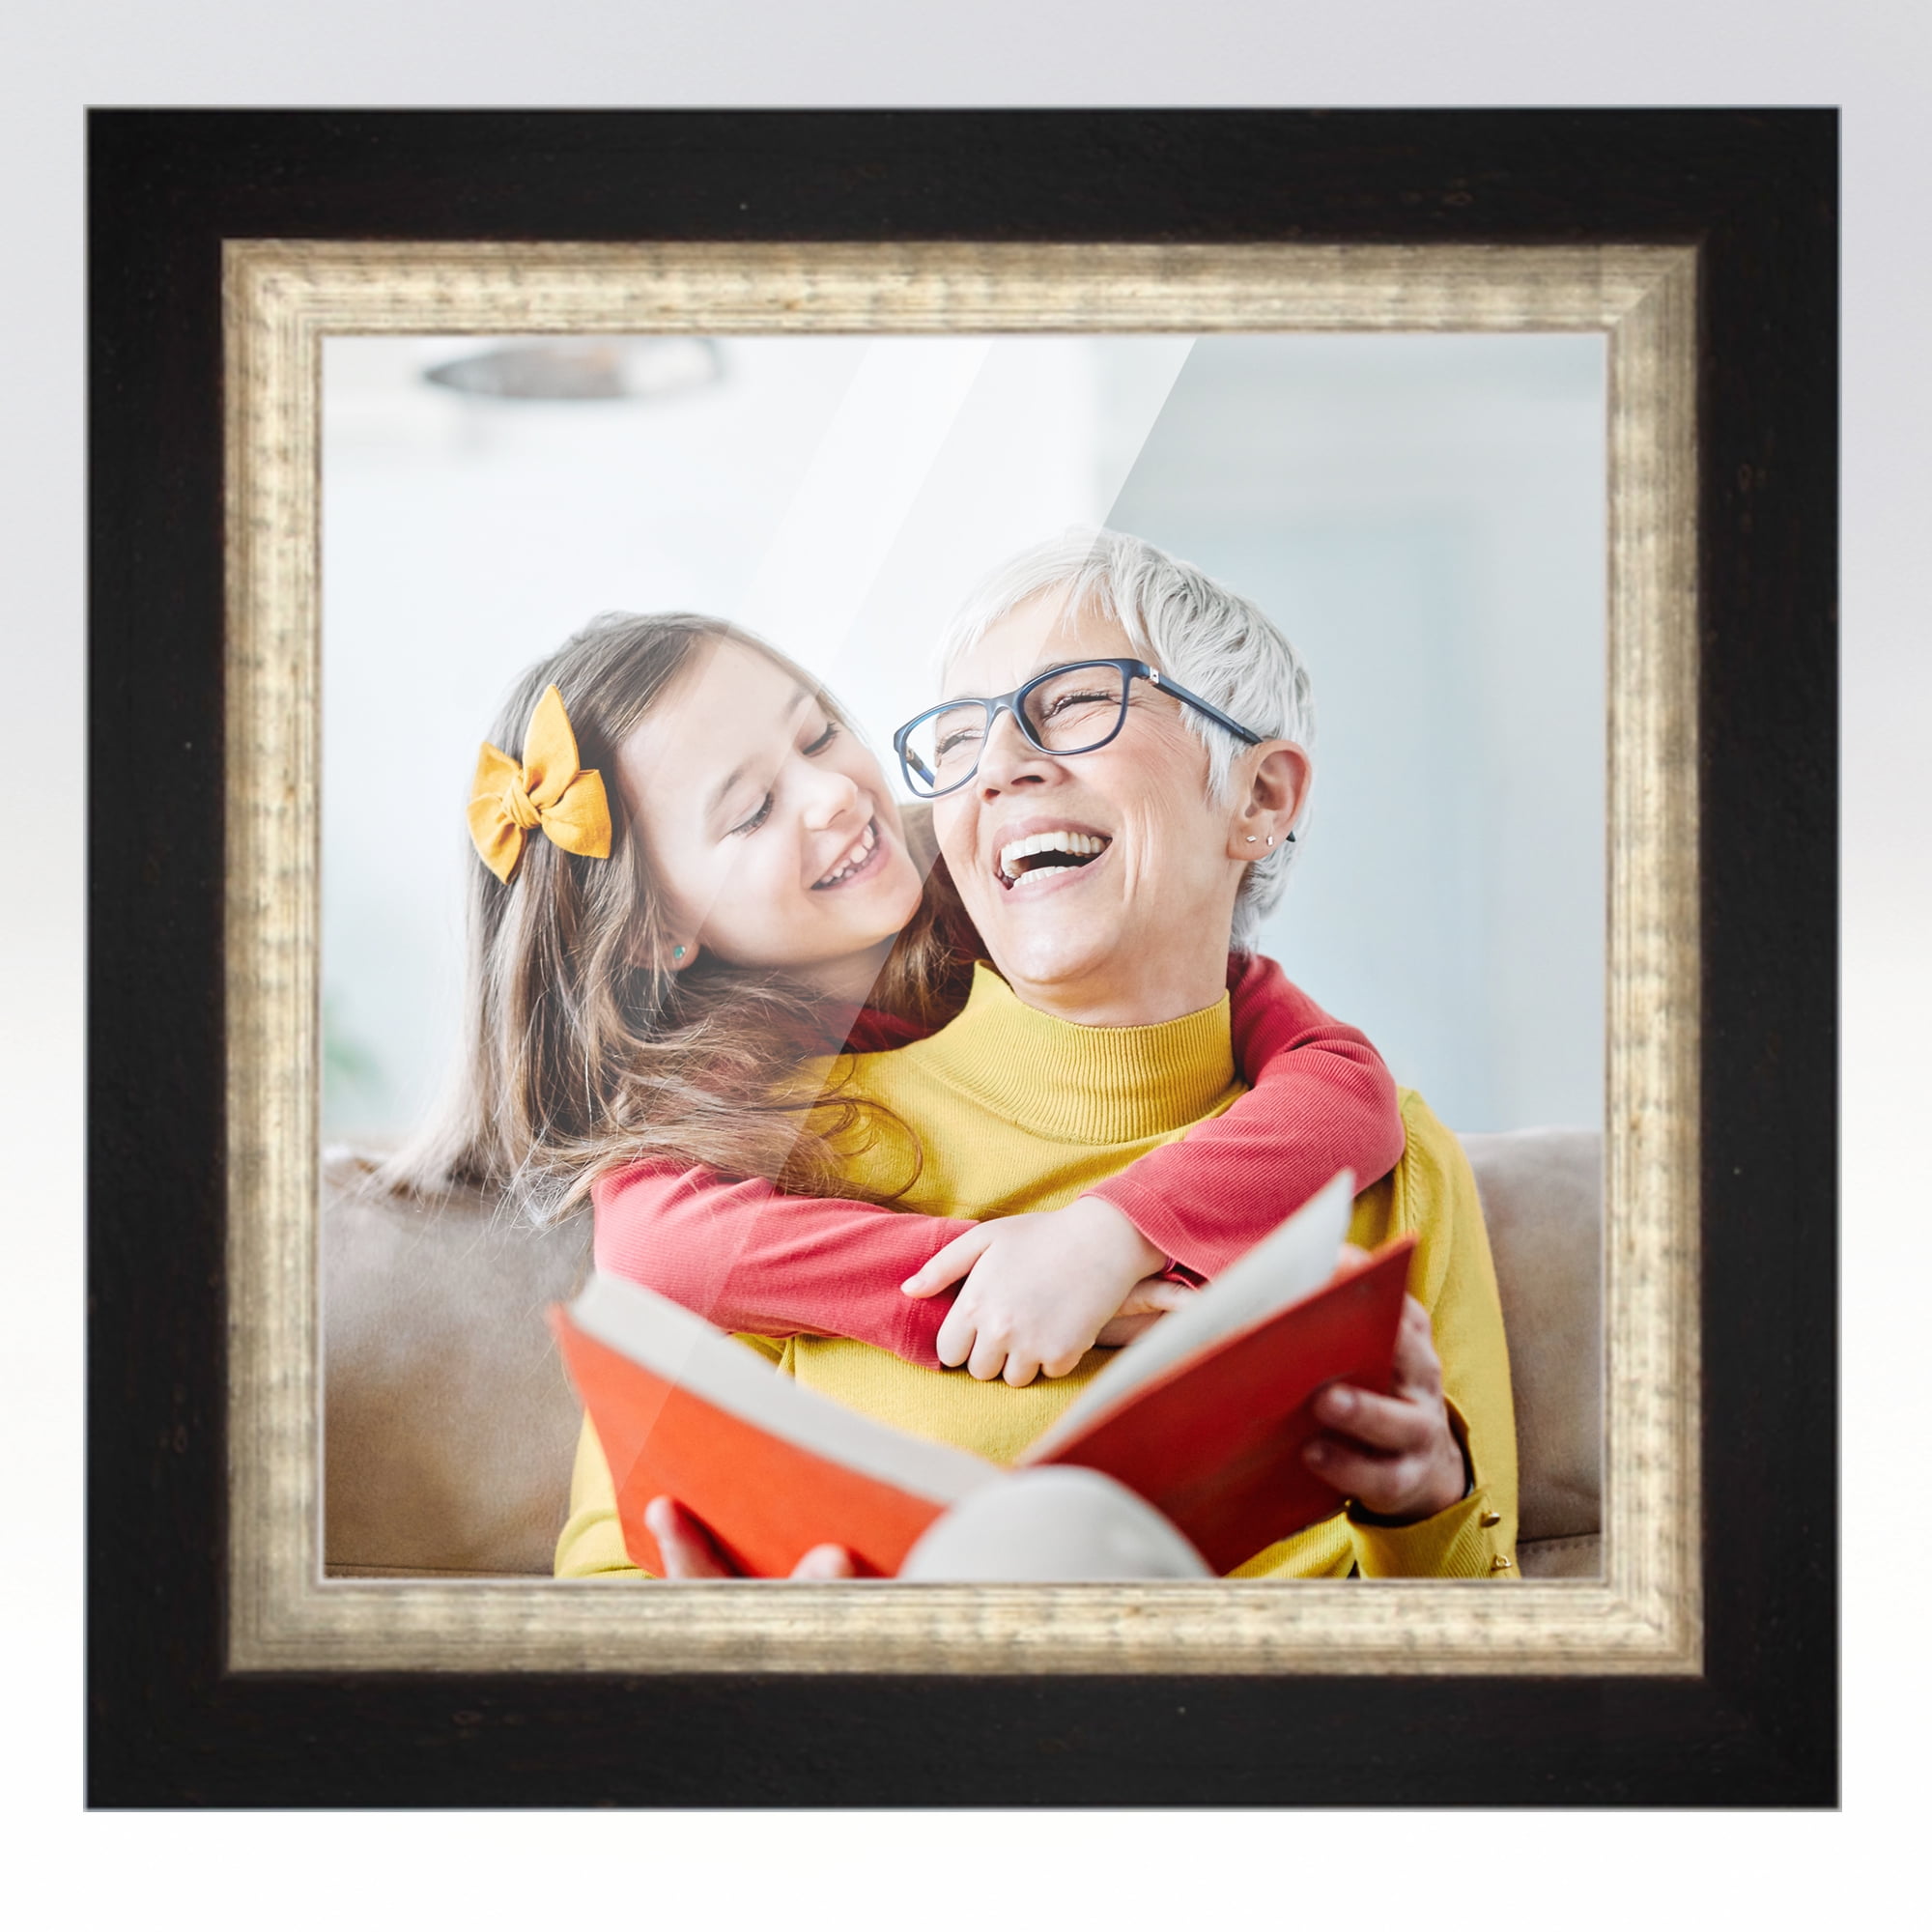 CustomPictureFrames White Wood Picture Frame - Made to Display Artwork Measuring 20x20 Inches